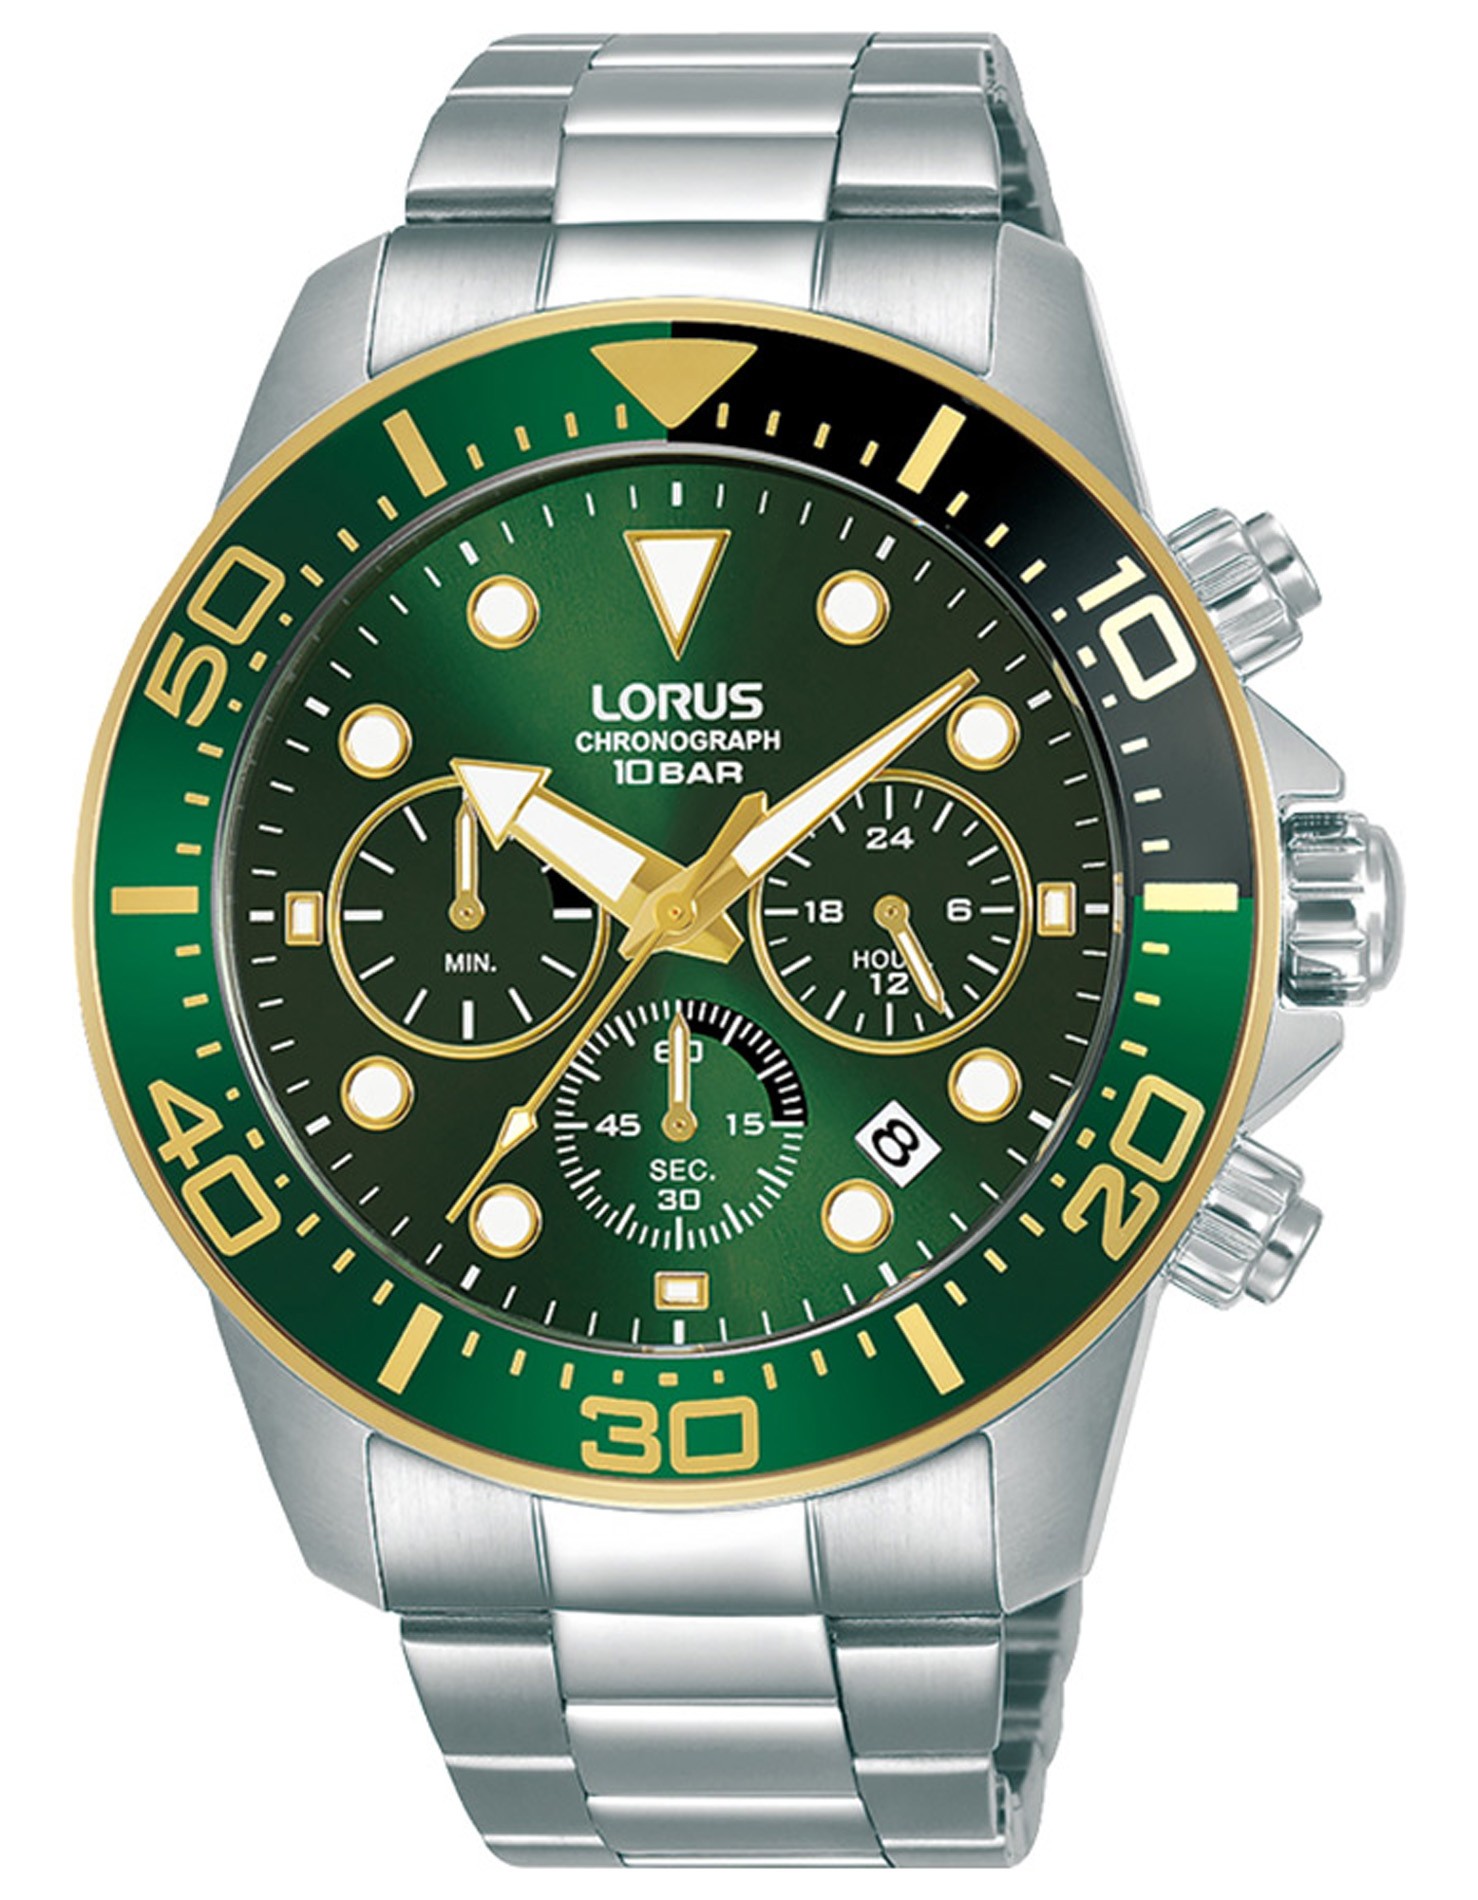 Lorus Men's Watch Lorus Sport Man Stainless Steel Men's Watch With Dark  Green Sunray Dial and Flat Mineral Crystal Glass 152295 RT340JX9 | Comprar Watch  Lorus Sport Man Stainless Steel Men's Watch